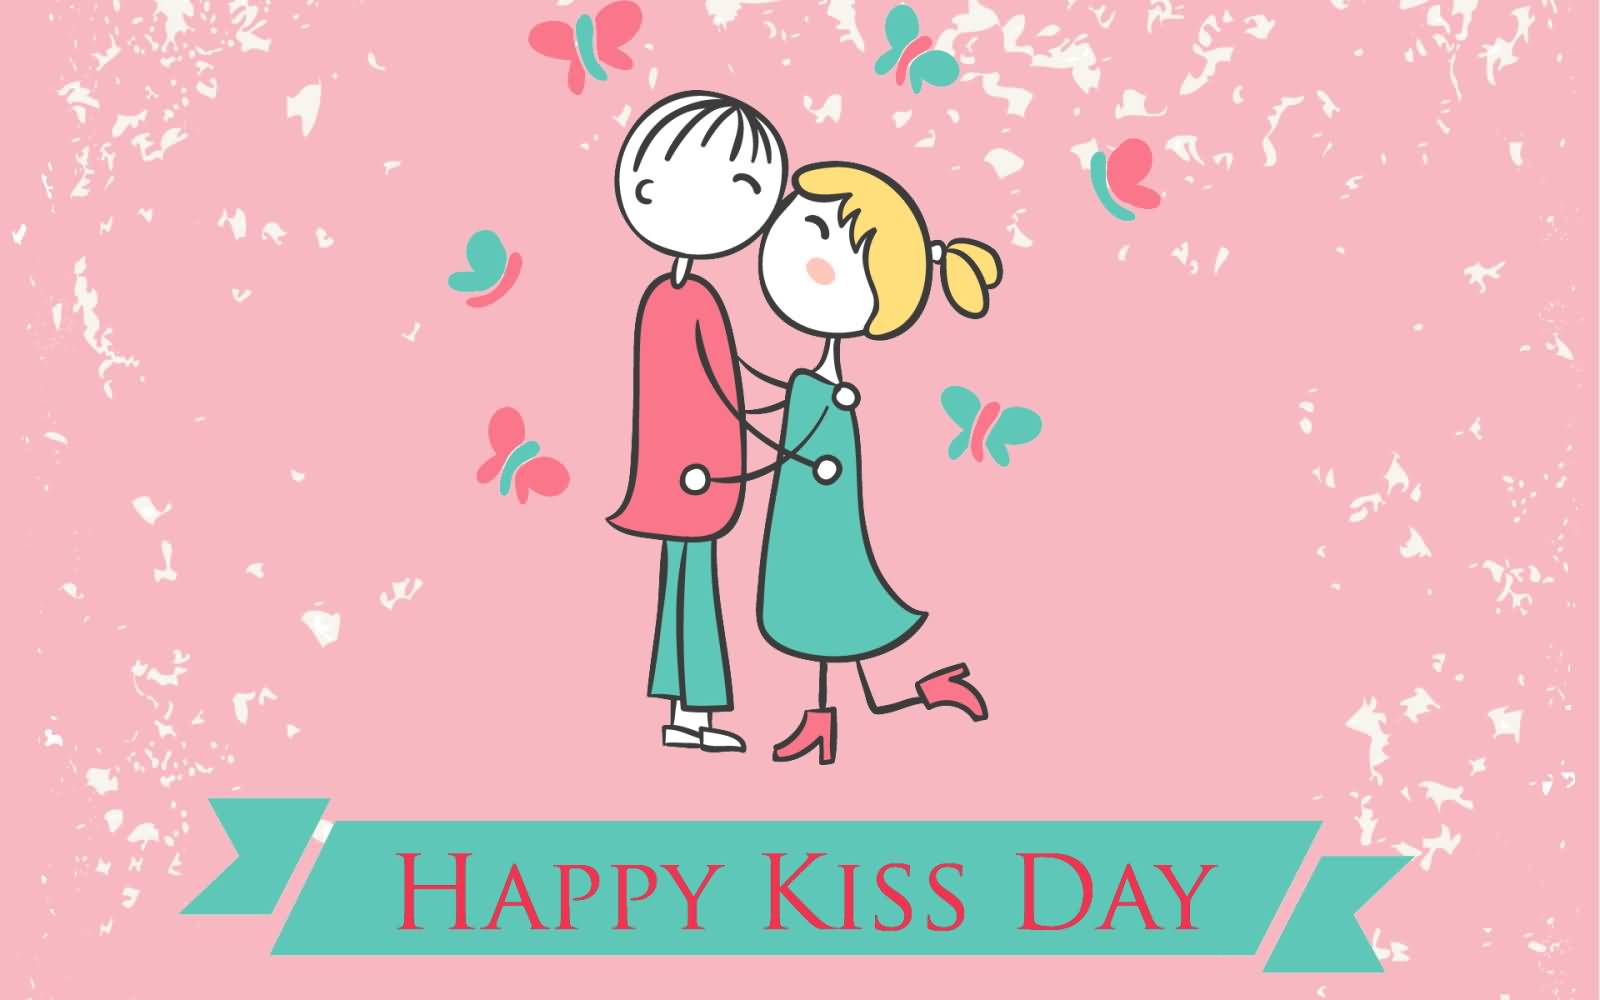 Best Kiss Day Greeting Pictures And Wallpaper